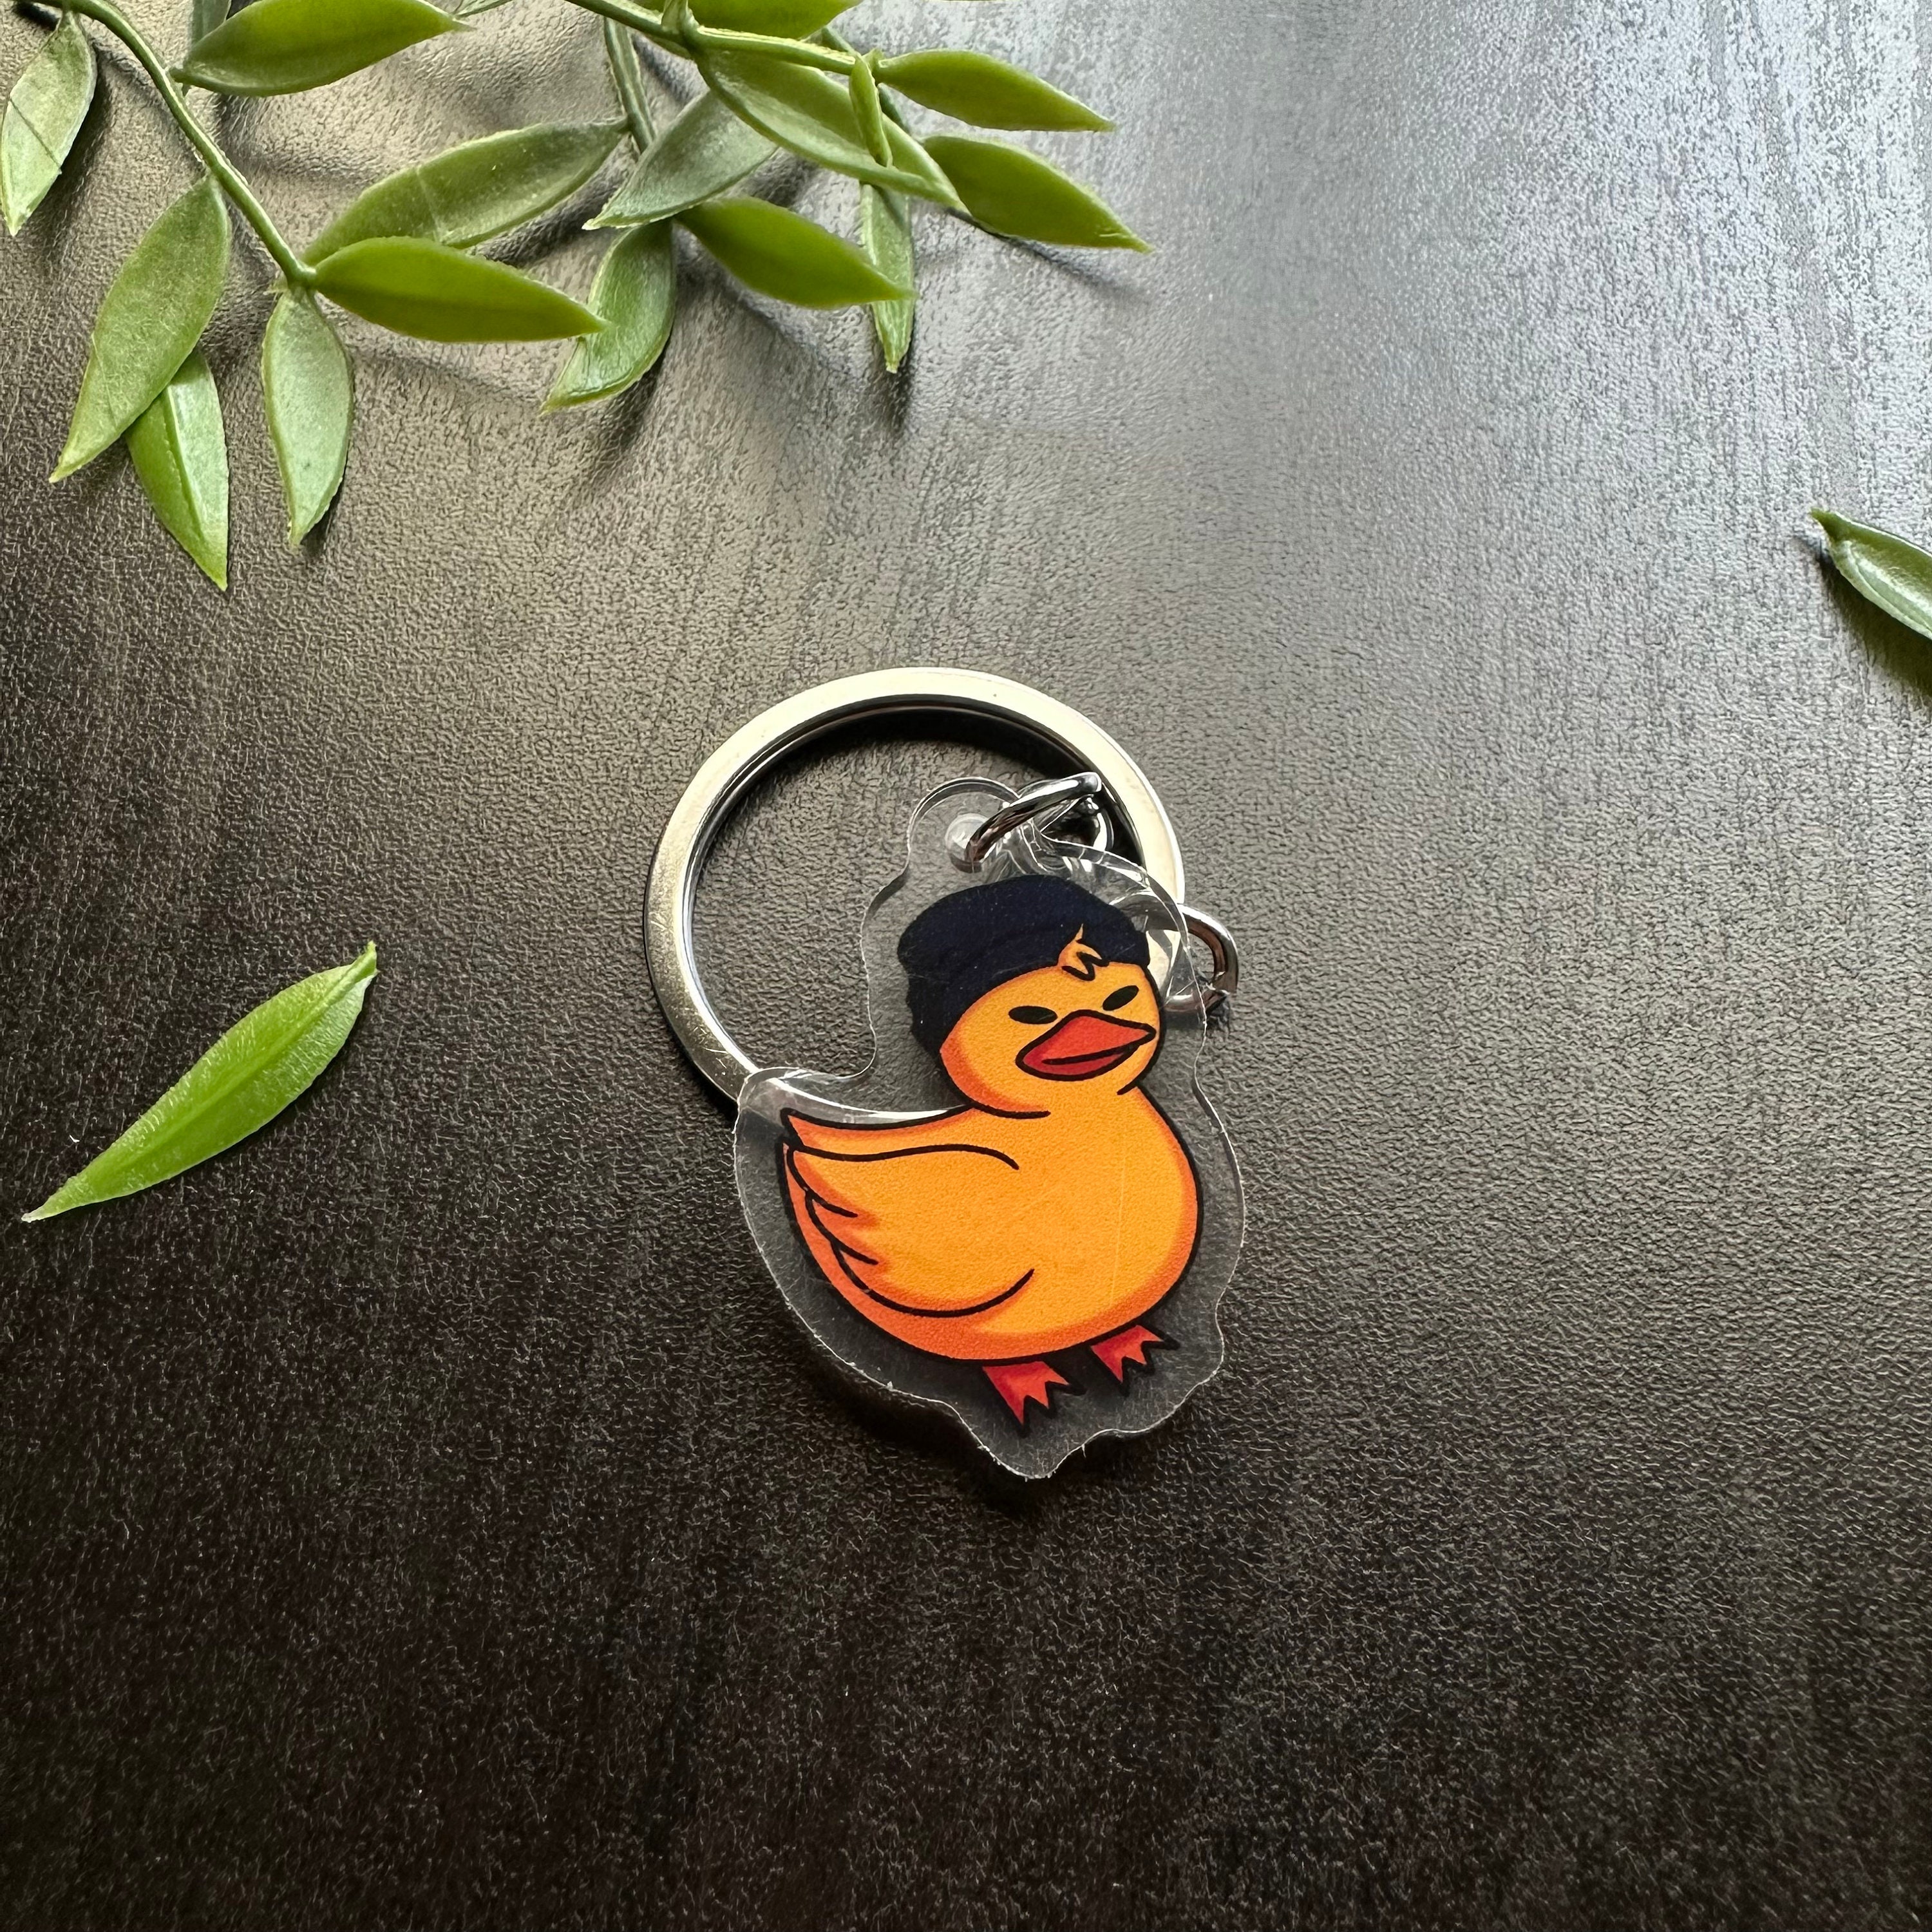 Quackity & Fundy Minecraft Skin Keychain/magnet Dream SMP -  Israel